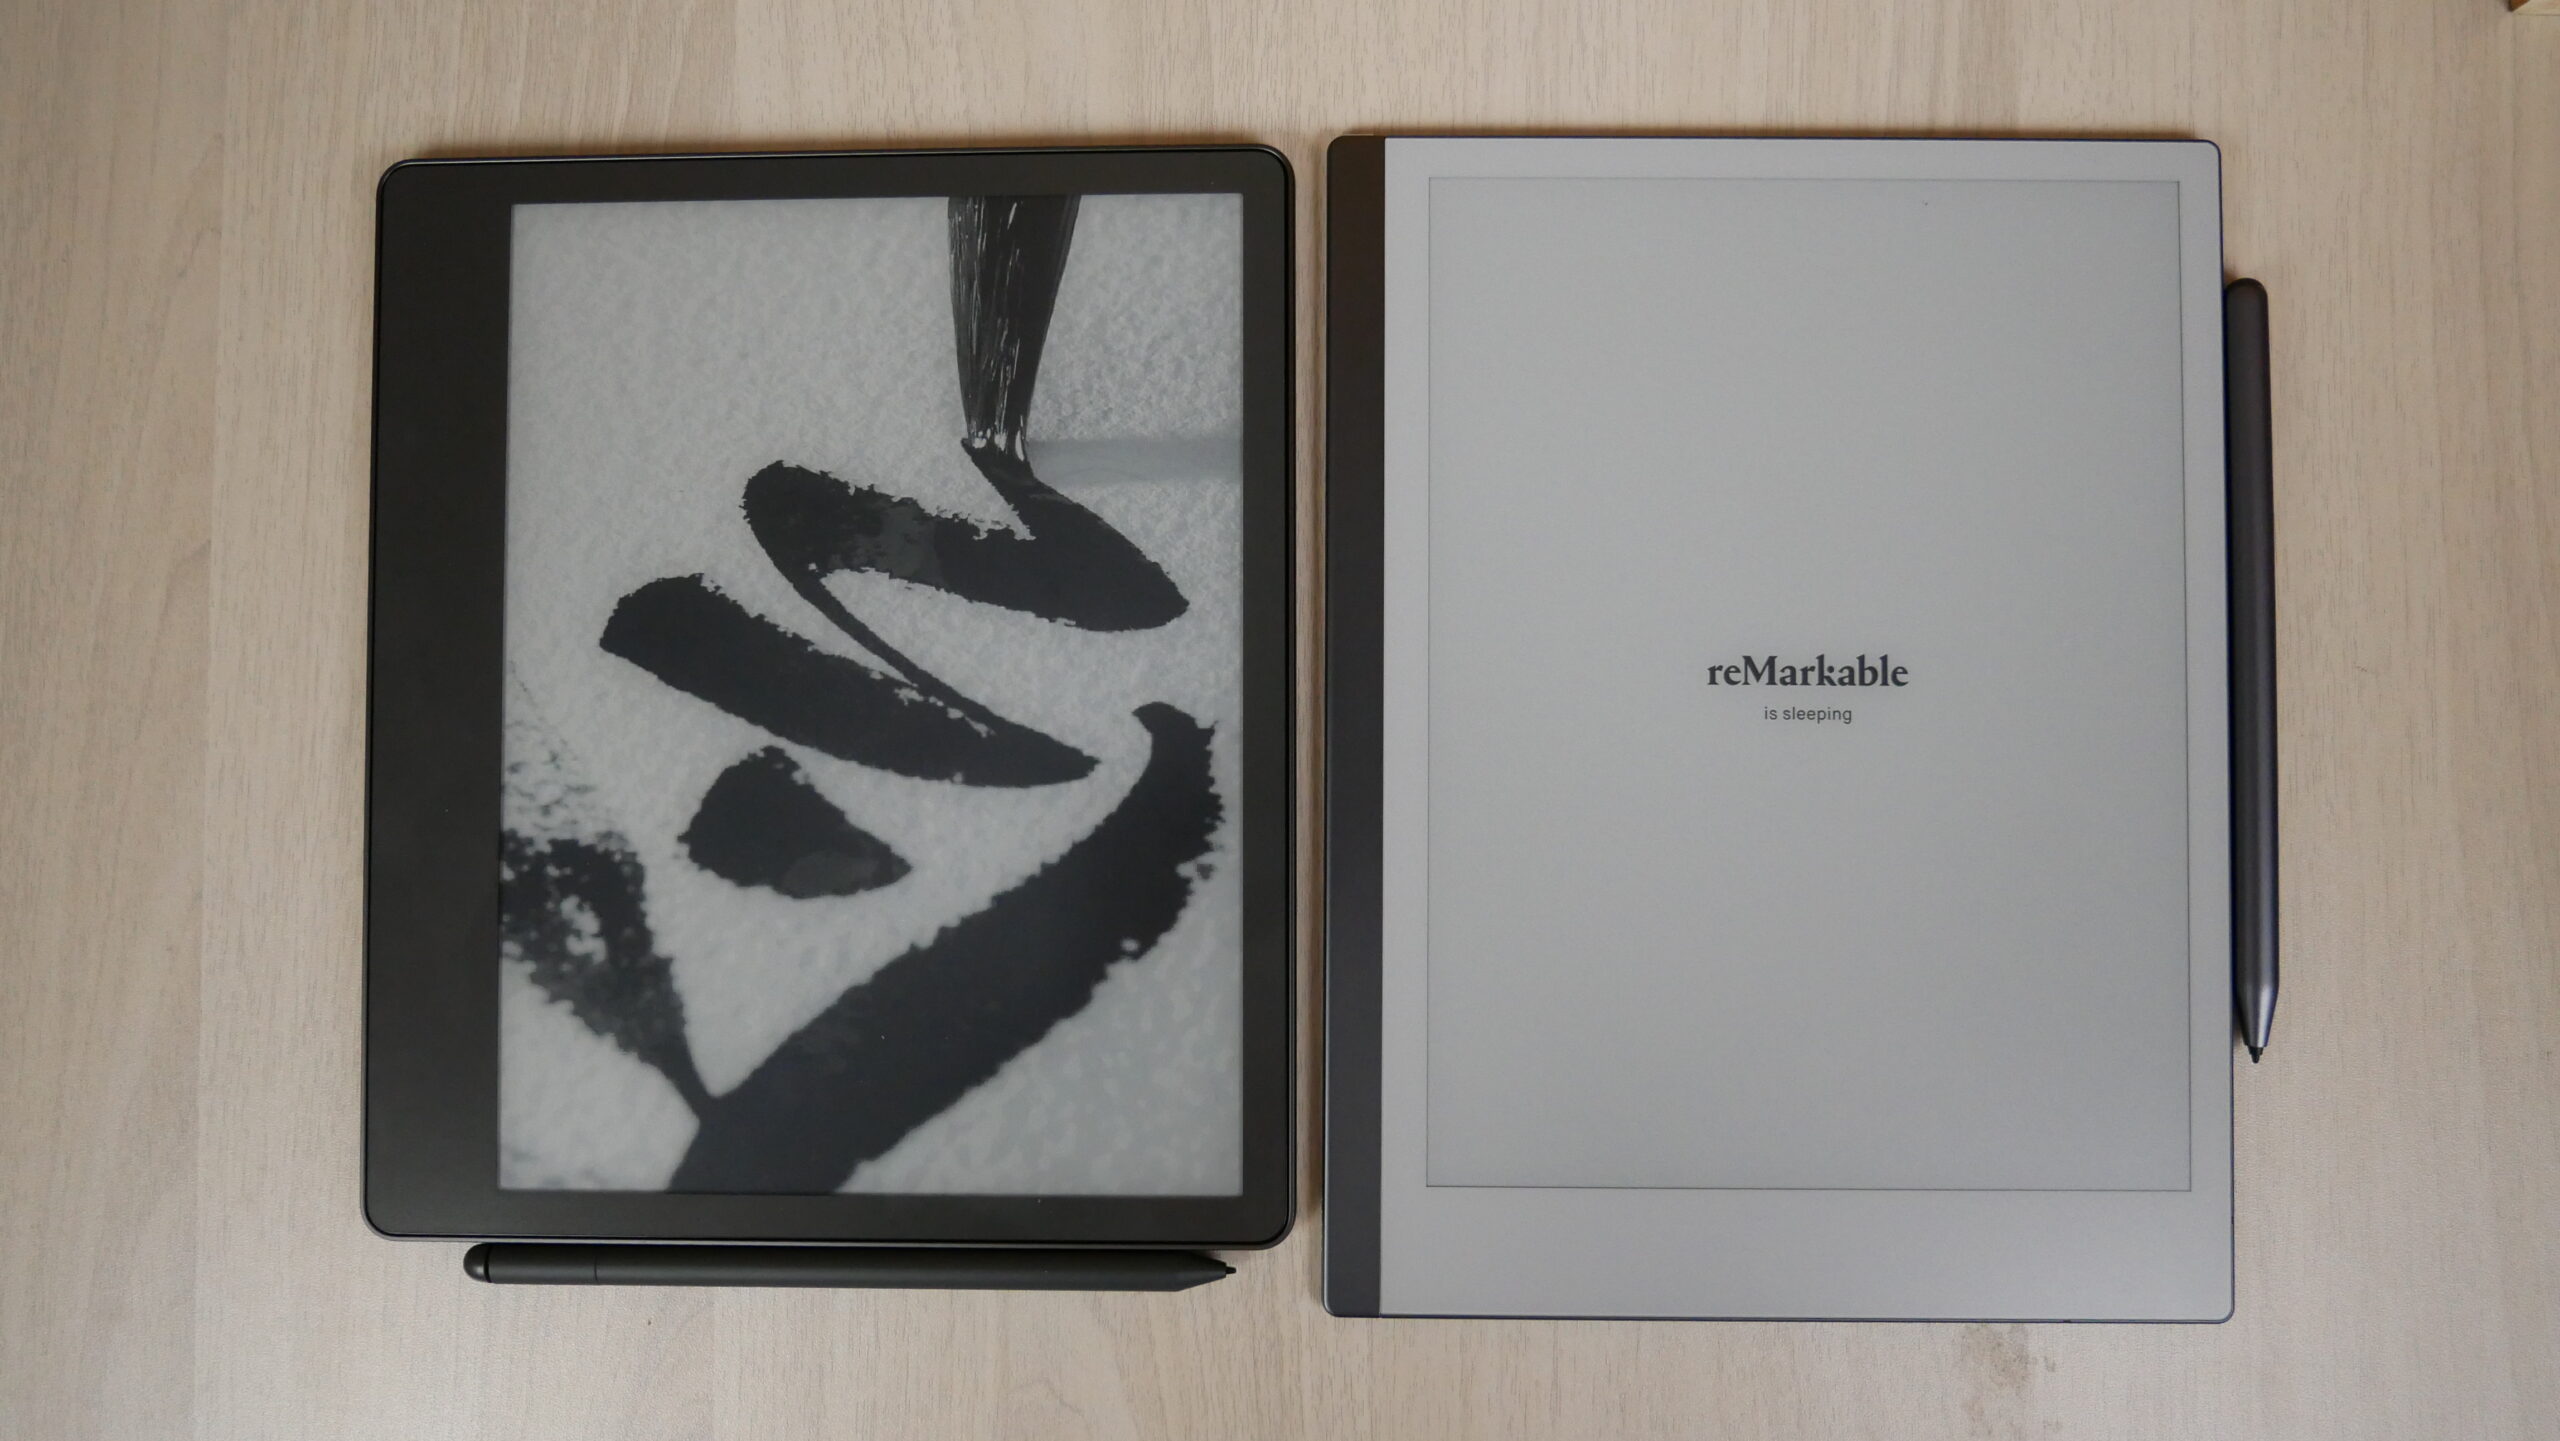 The Remarkable 2 E Ink sketch tablet is a lot cooler than I thought - CNET